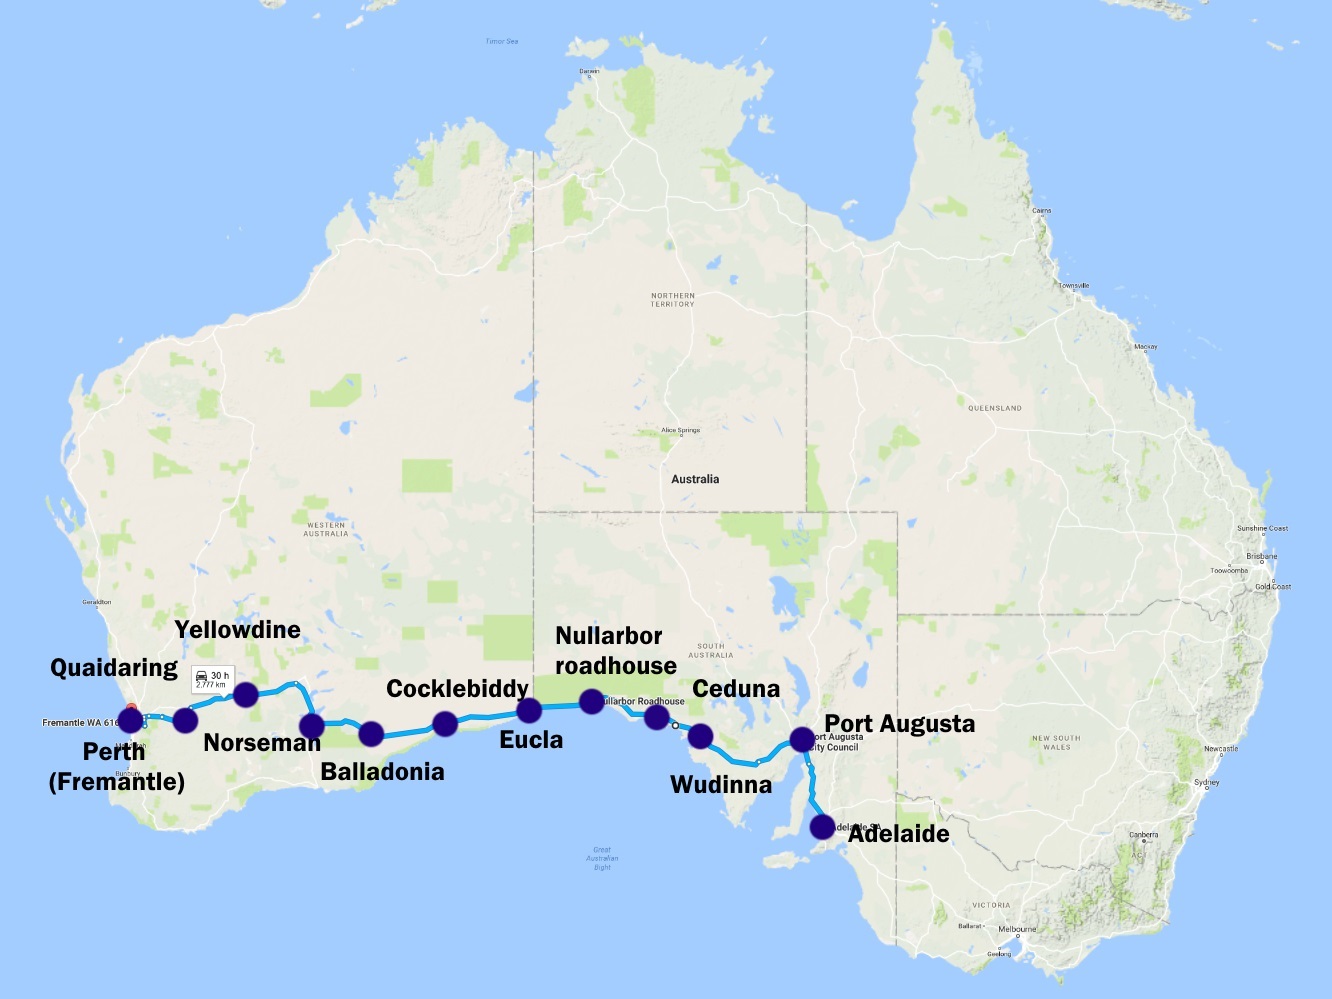 Adelaide to Perth, about 2800km in 11 days